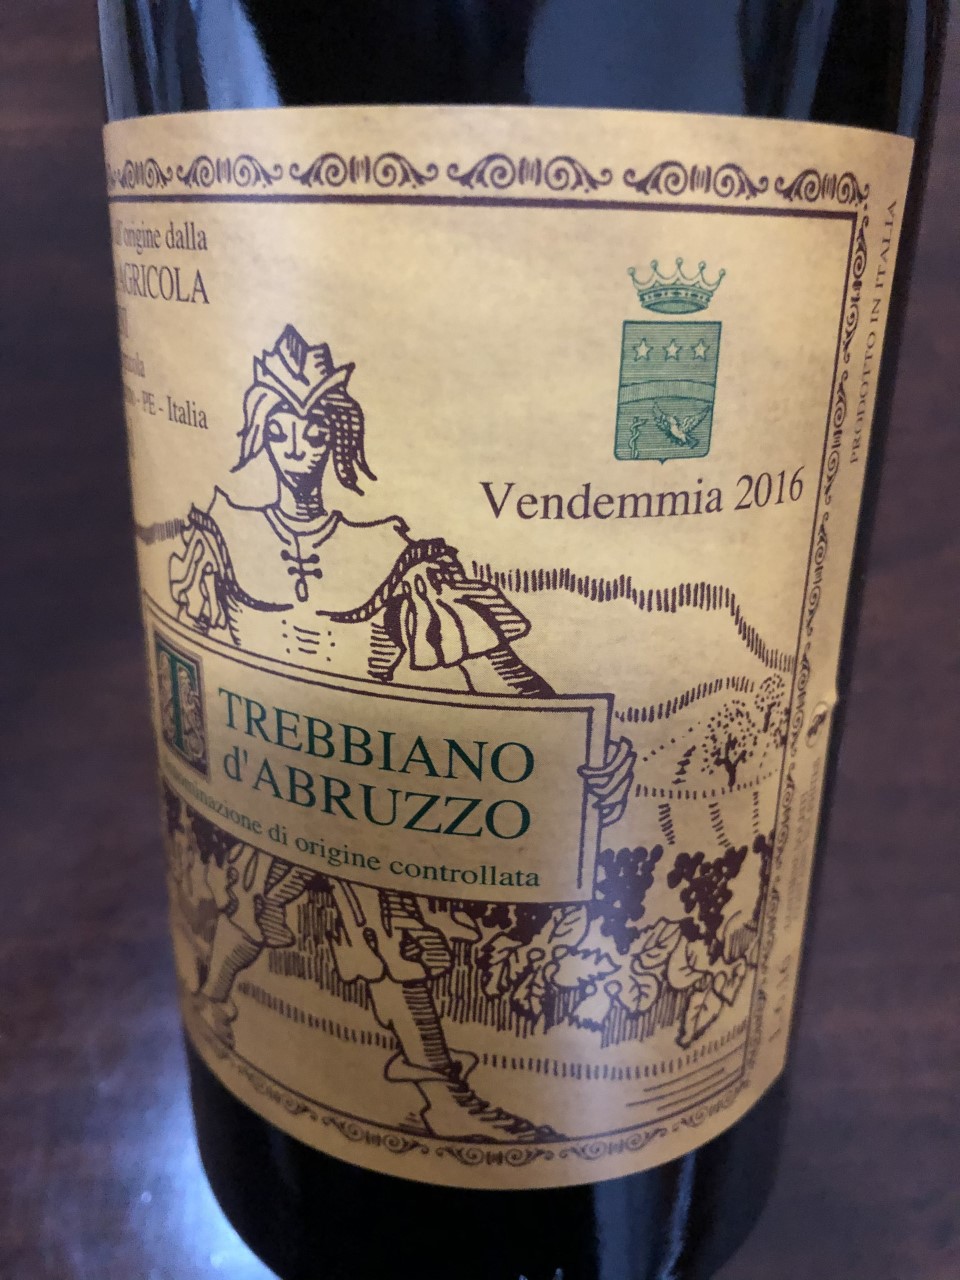 Valentini-once-again-made-a-stellar-Trebbiano-dAbruzzo-wine-oneof-Italys-longest-lived-white-wines-1-2-1-1-1-1-1